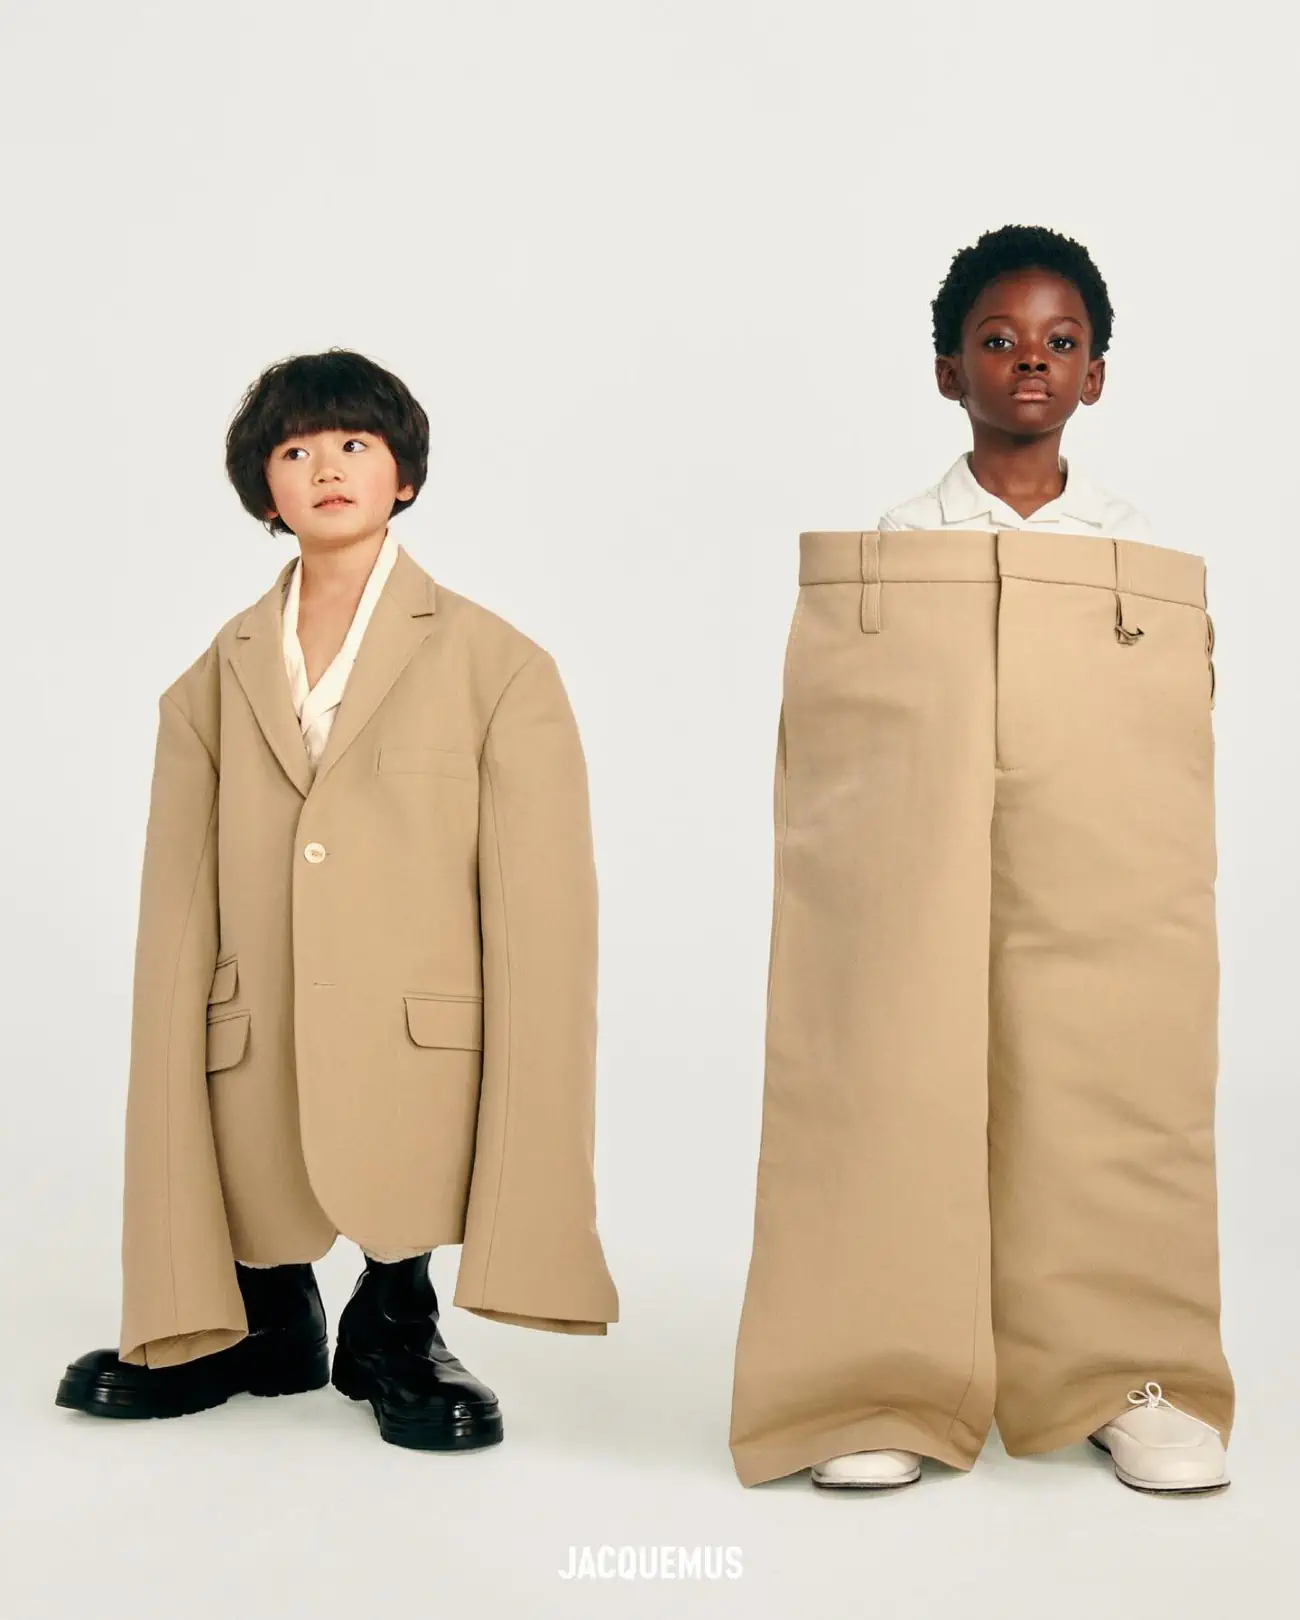 Jacquemus debuts charming ''MINI ME'', its first kids collection